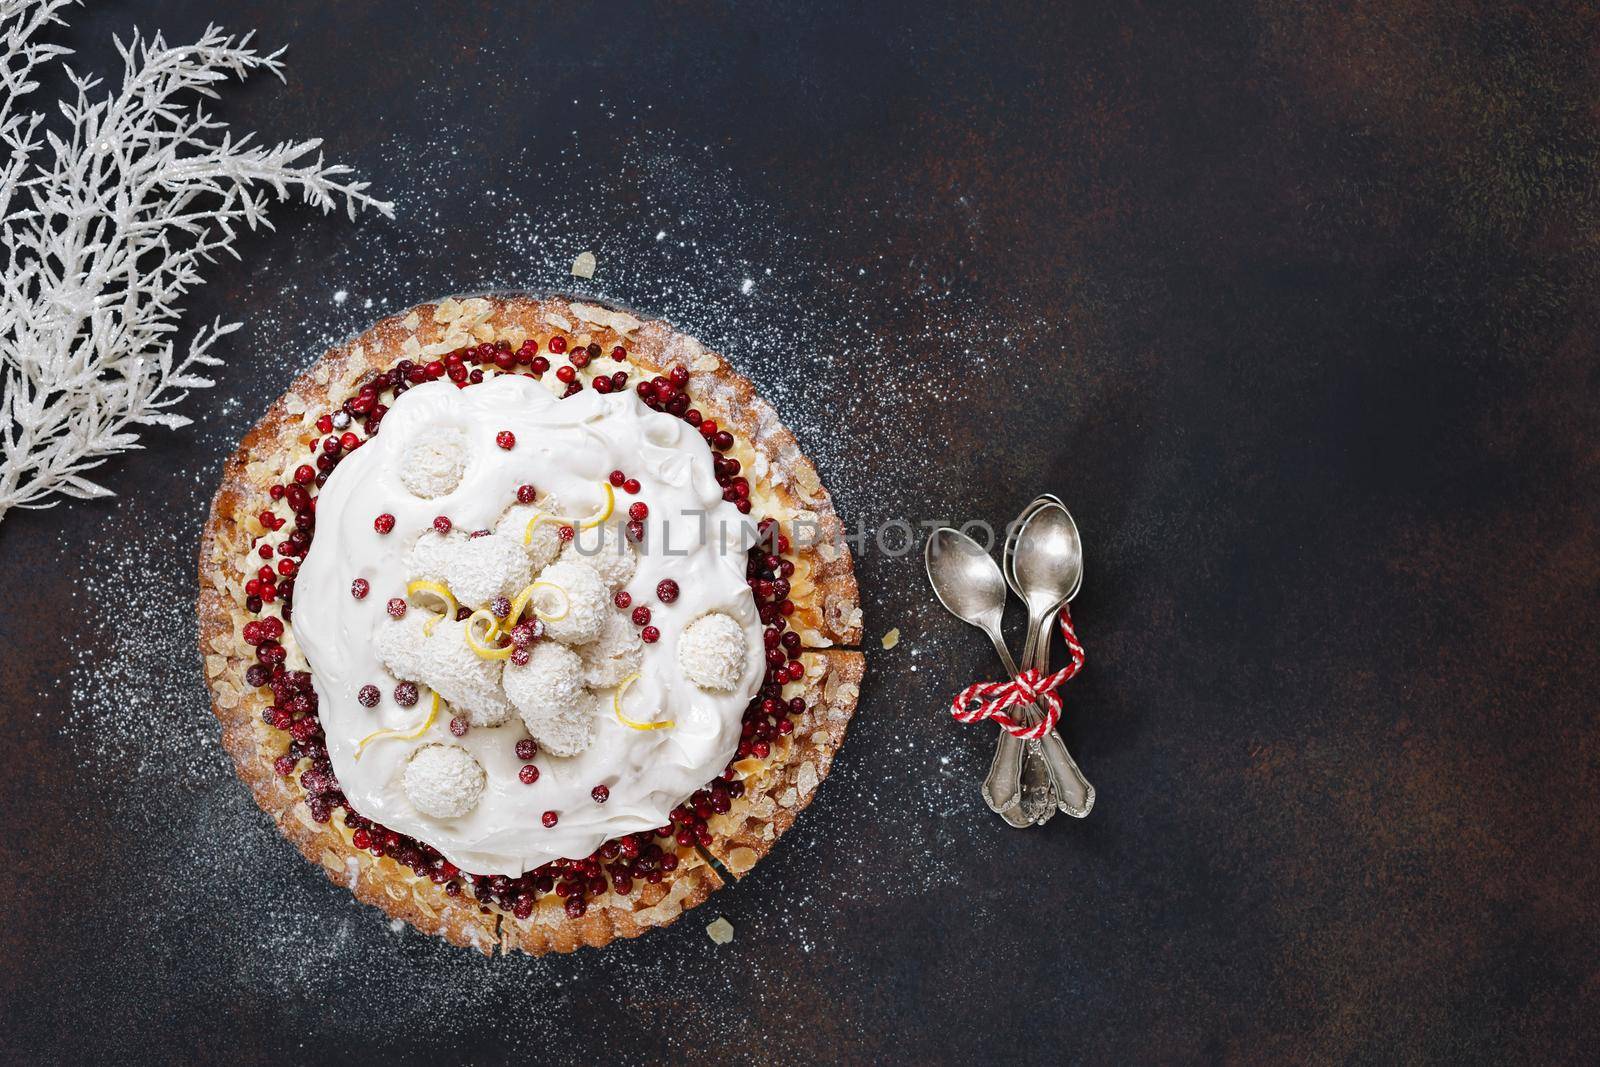 Cranberry tart. Delicious brown butter cranberry tart with fresh cranberries and coconut balls on top. Top view, blank space, rustic background